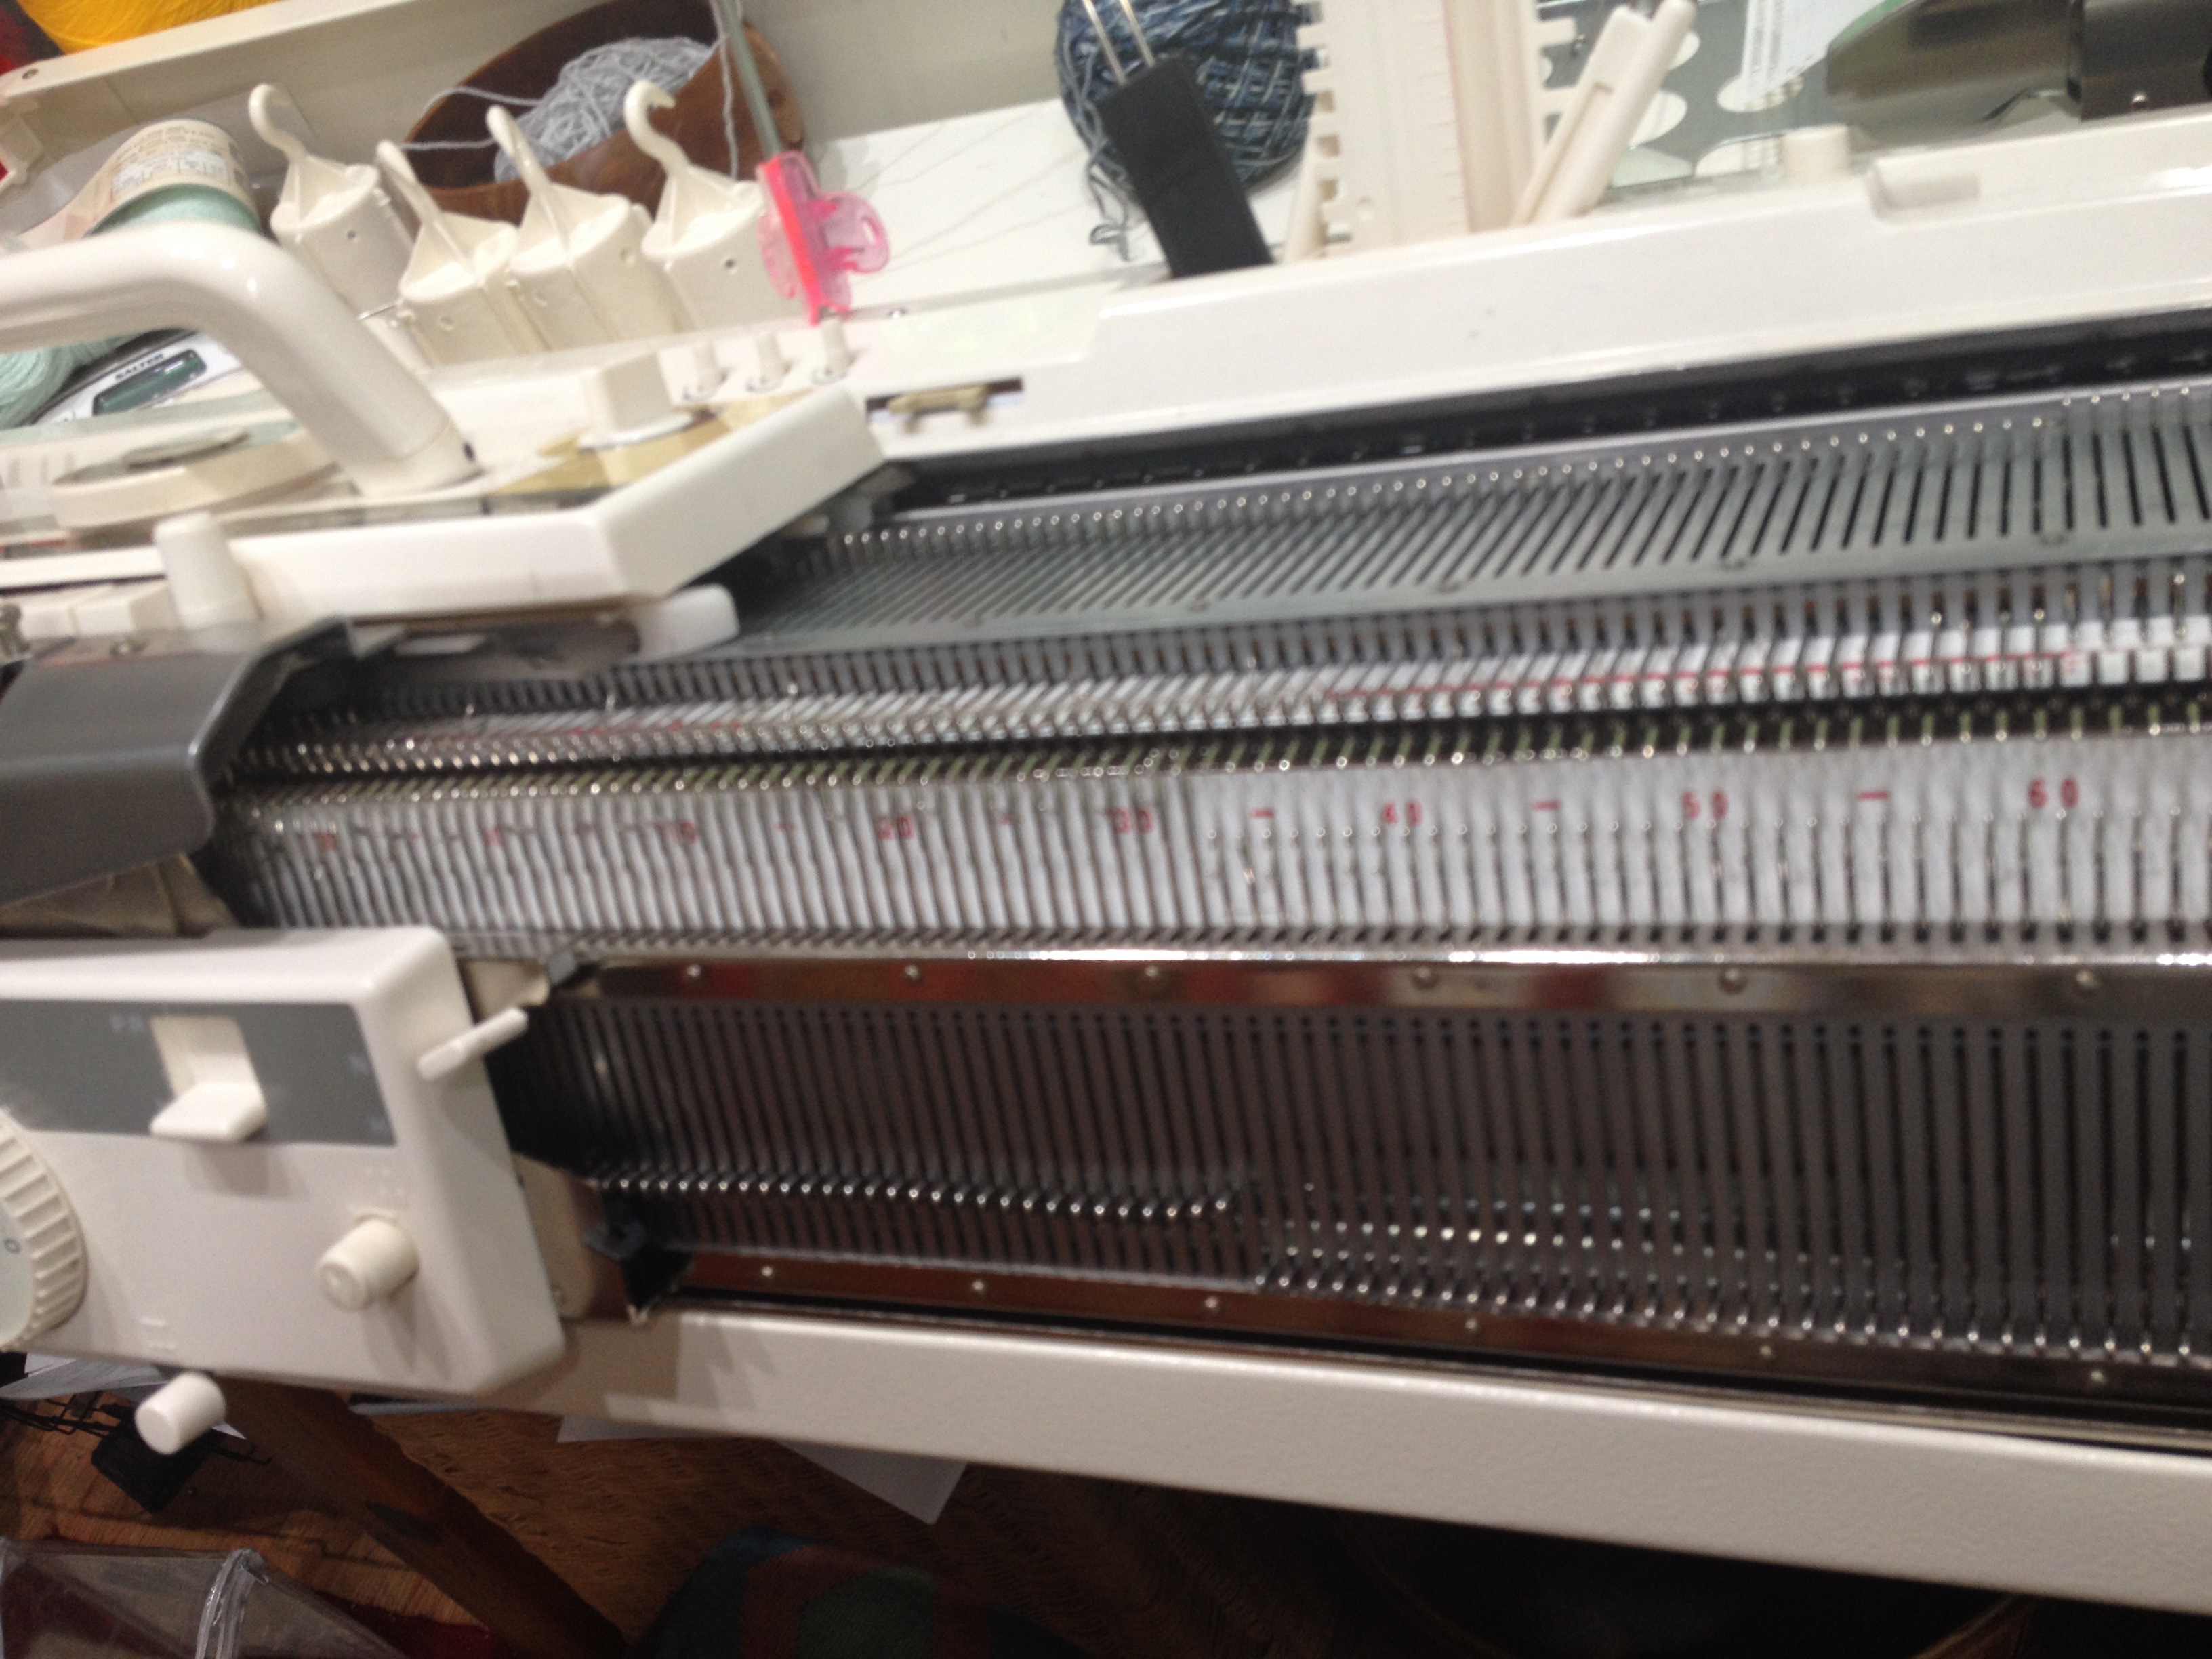 Taitexma knitting machine with ribber attachment